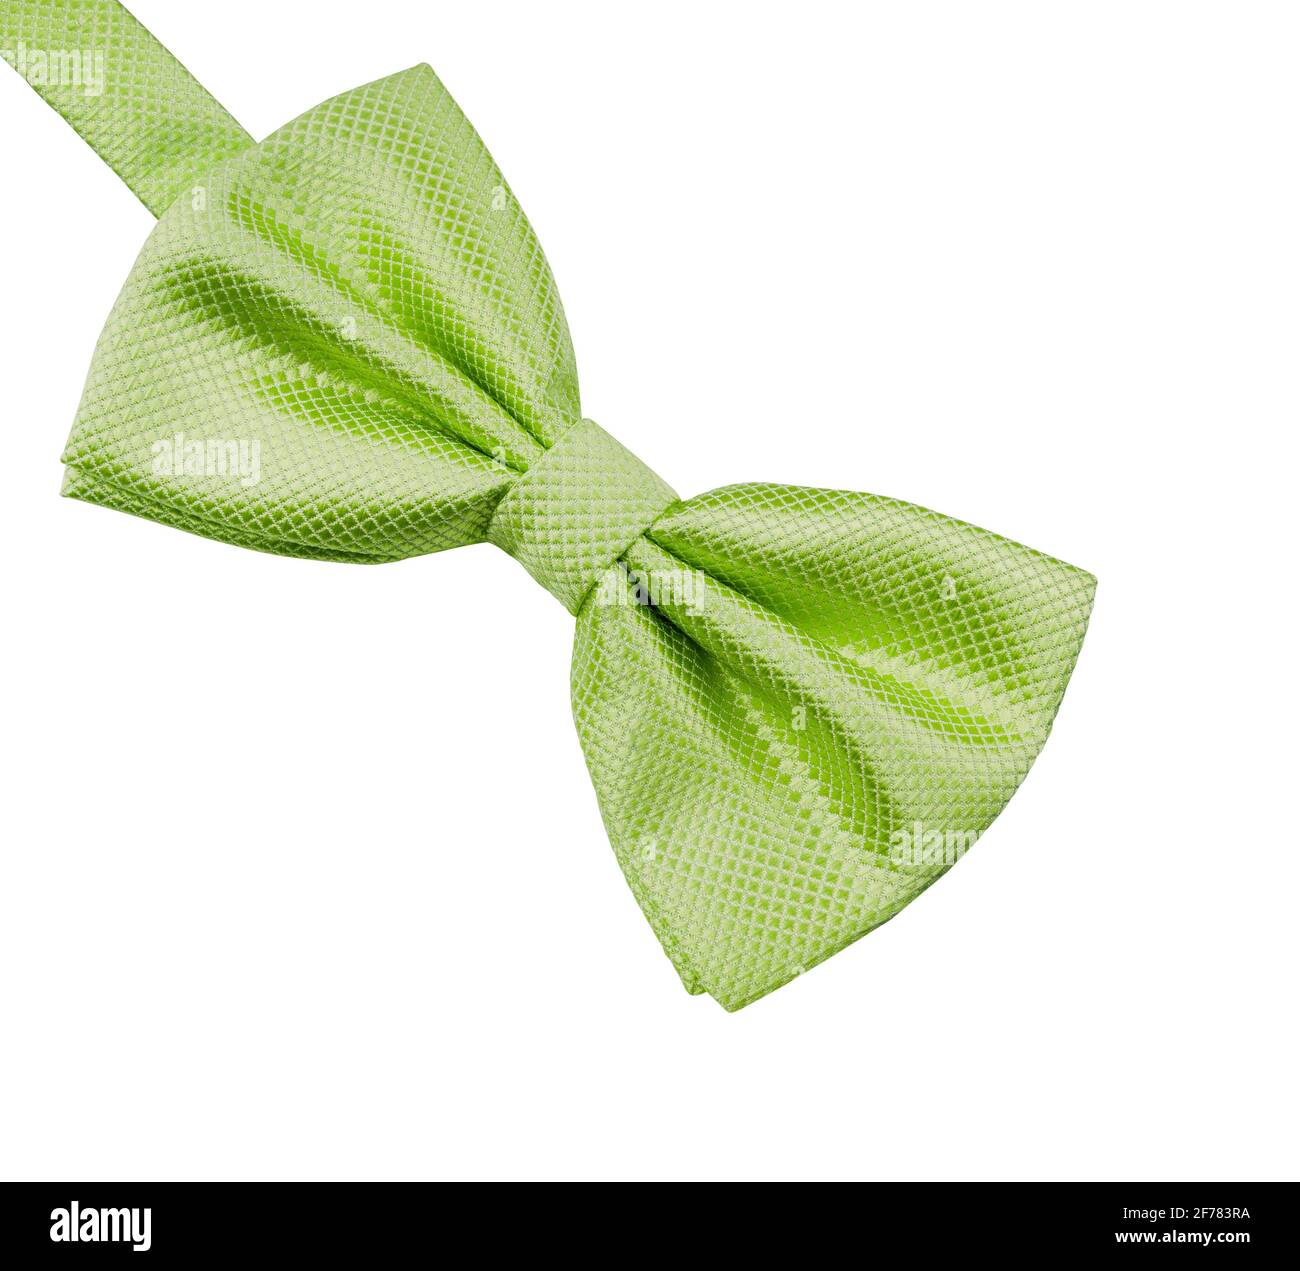 Light green bow tie isolated on white background. Men's accessory for wedding ceremony Stock Photo